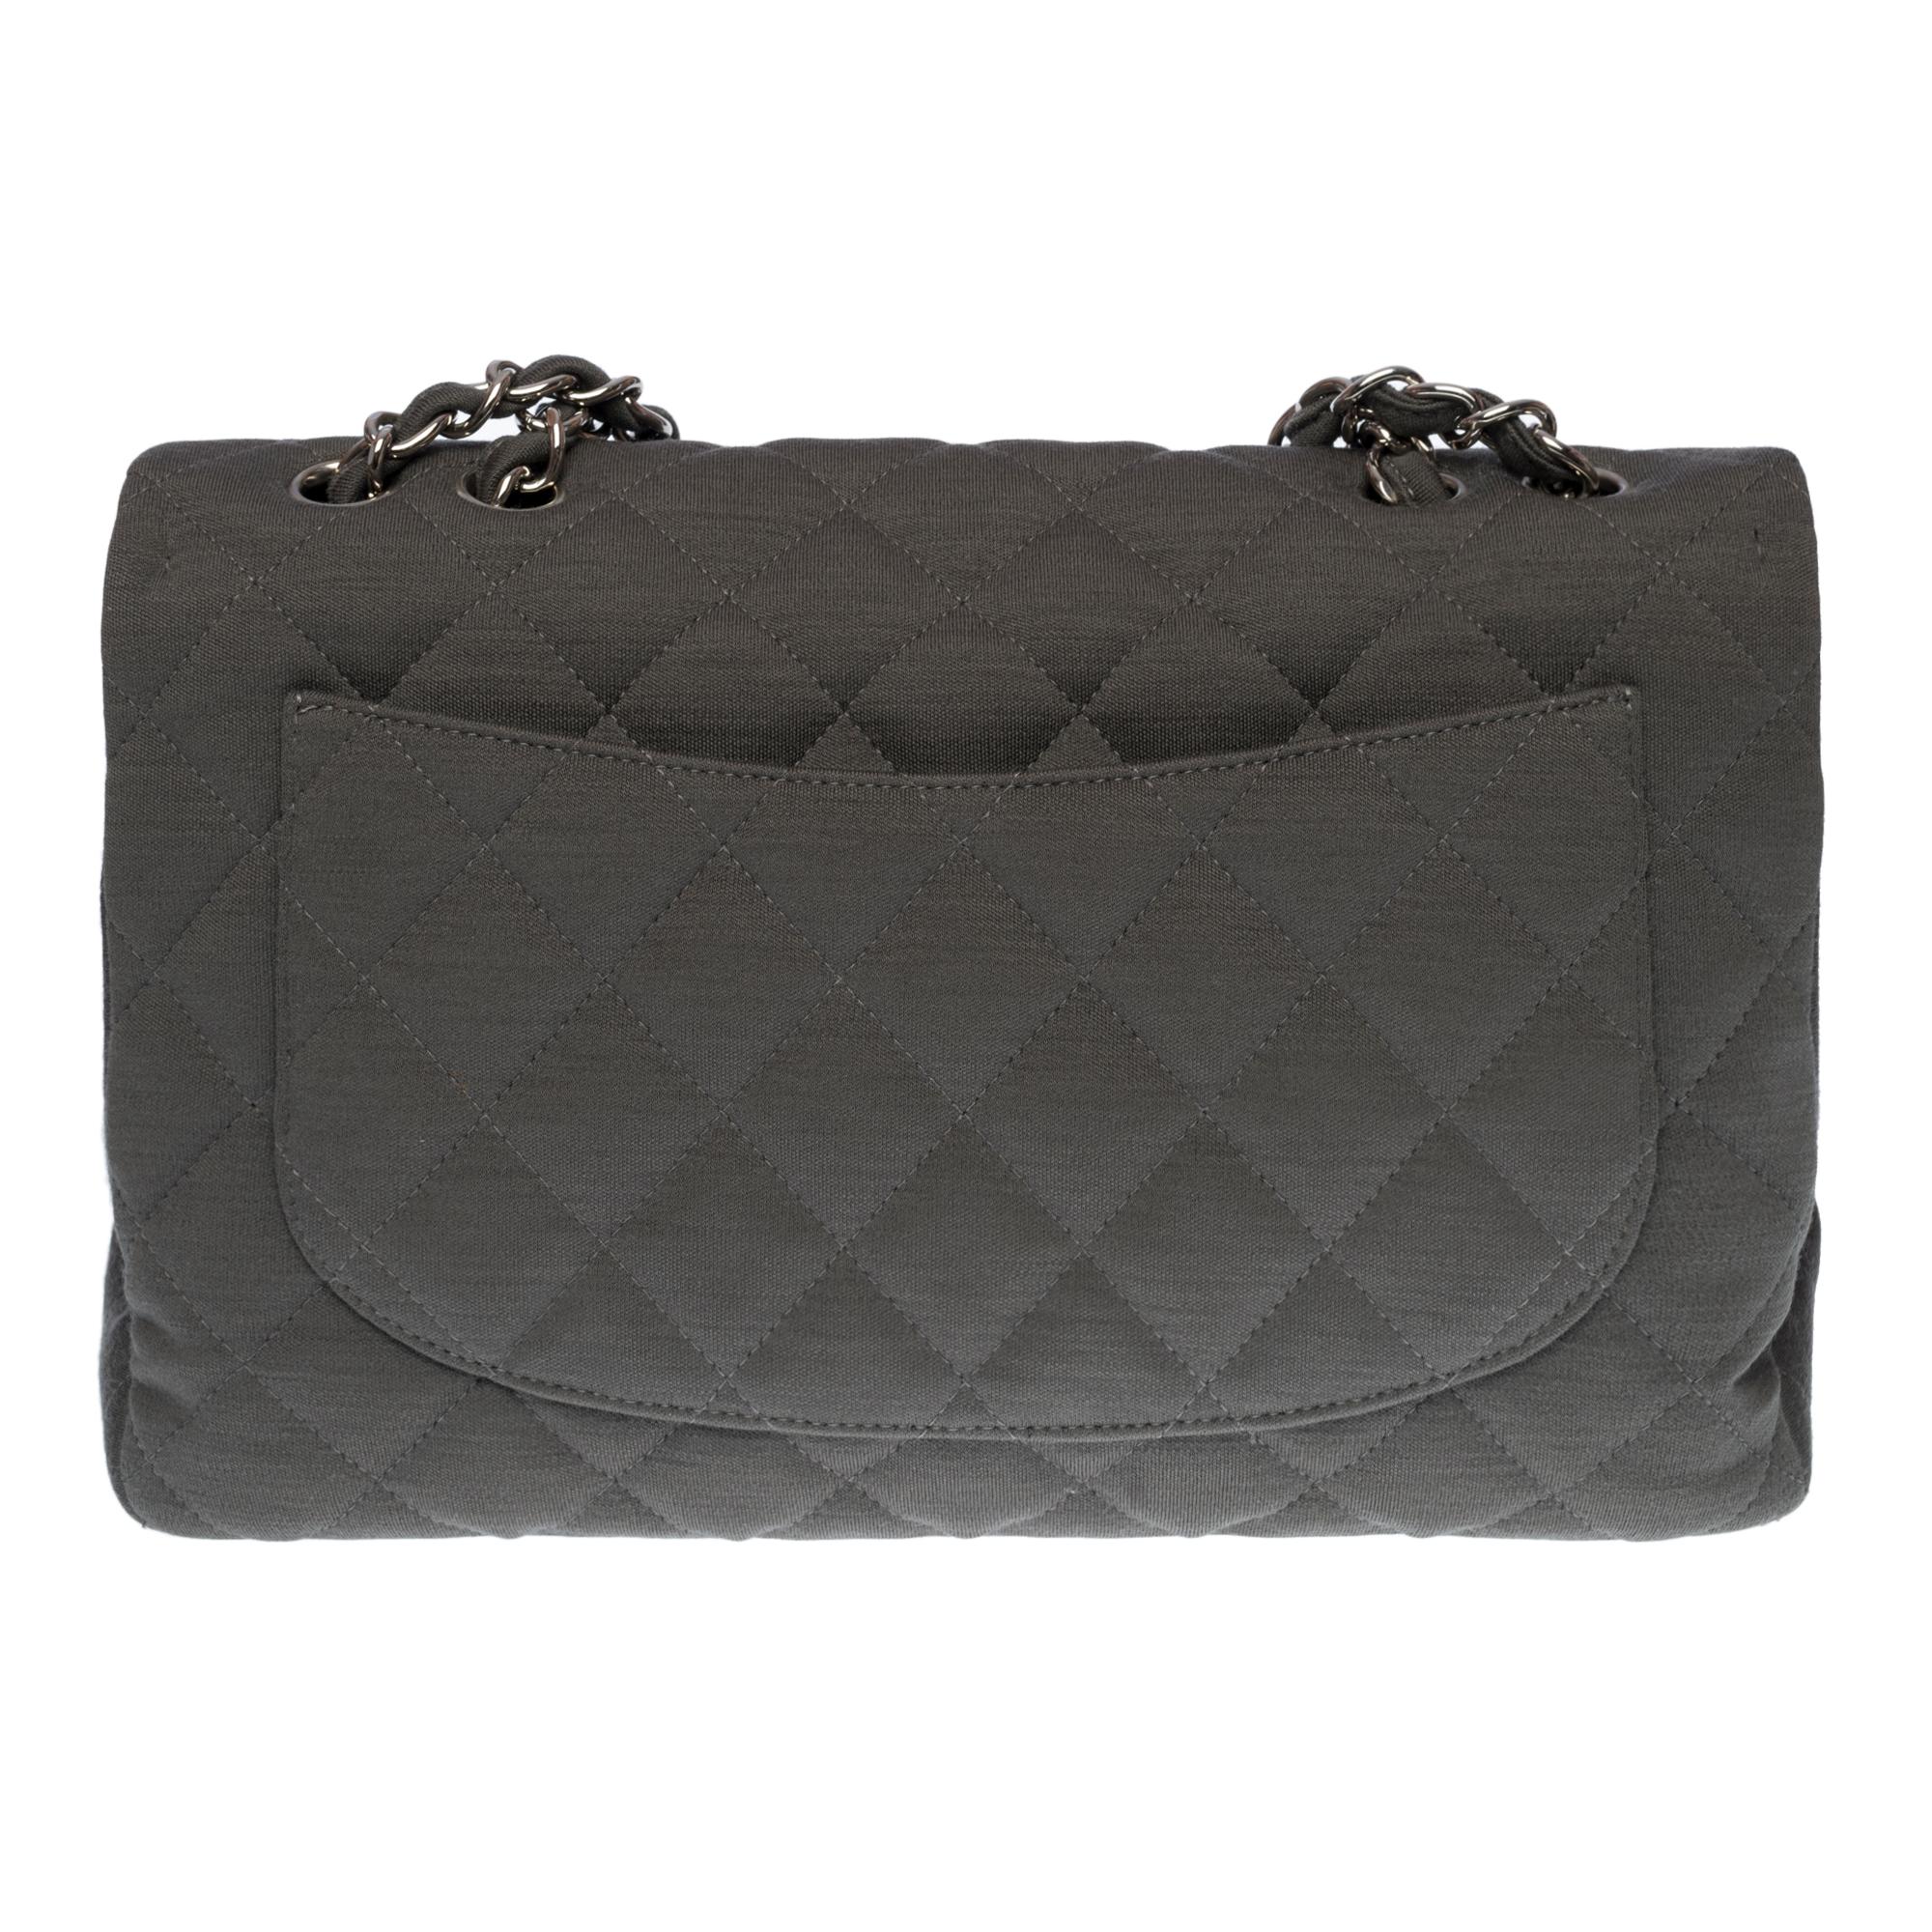 Beautiful Chanel Timeless Jumbo single flap shoulder bag in grey quilted jersey, silver metal hardware, a silver metal chain handle interwoven with grey jersey. allowing a hand, shoulder and crossbody support

Silver metal flap closure
A patch